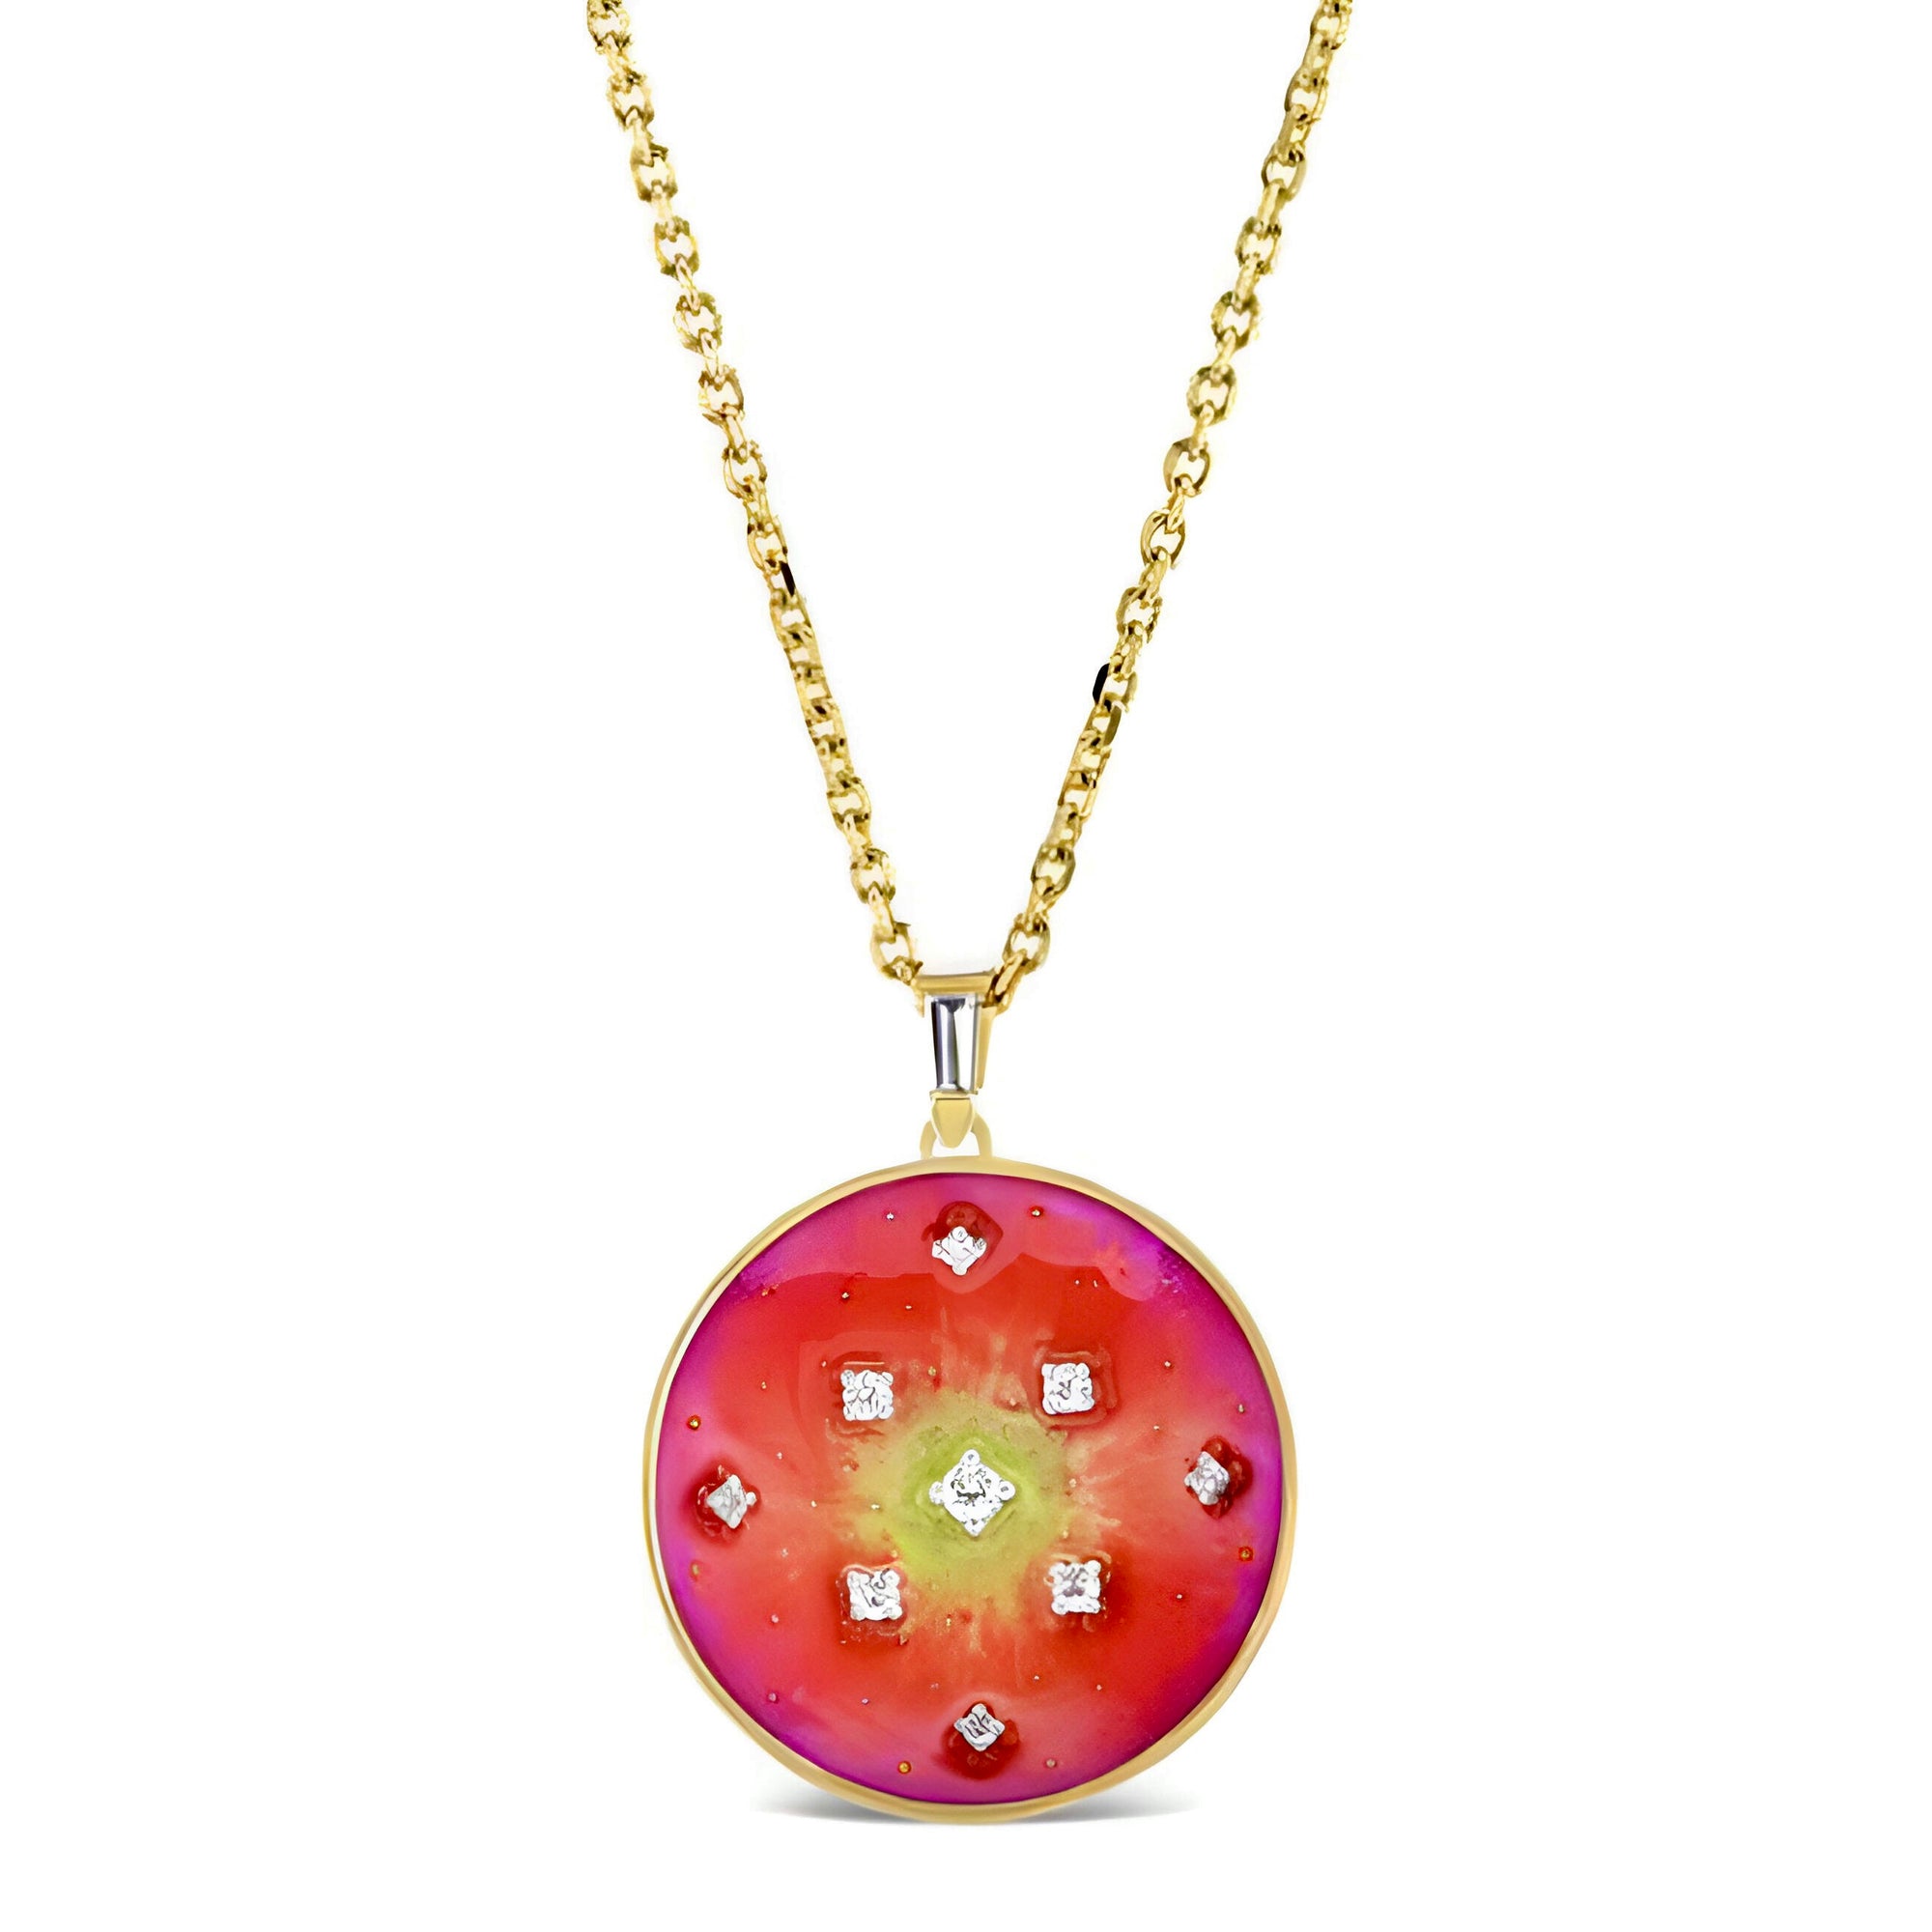 Louis Vuitton Color Blossom Necklace, Pink Gold, White Gold, Pink Opal, White Mother-of-Pearl and Diamonds. Size NSA